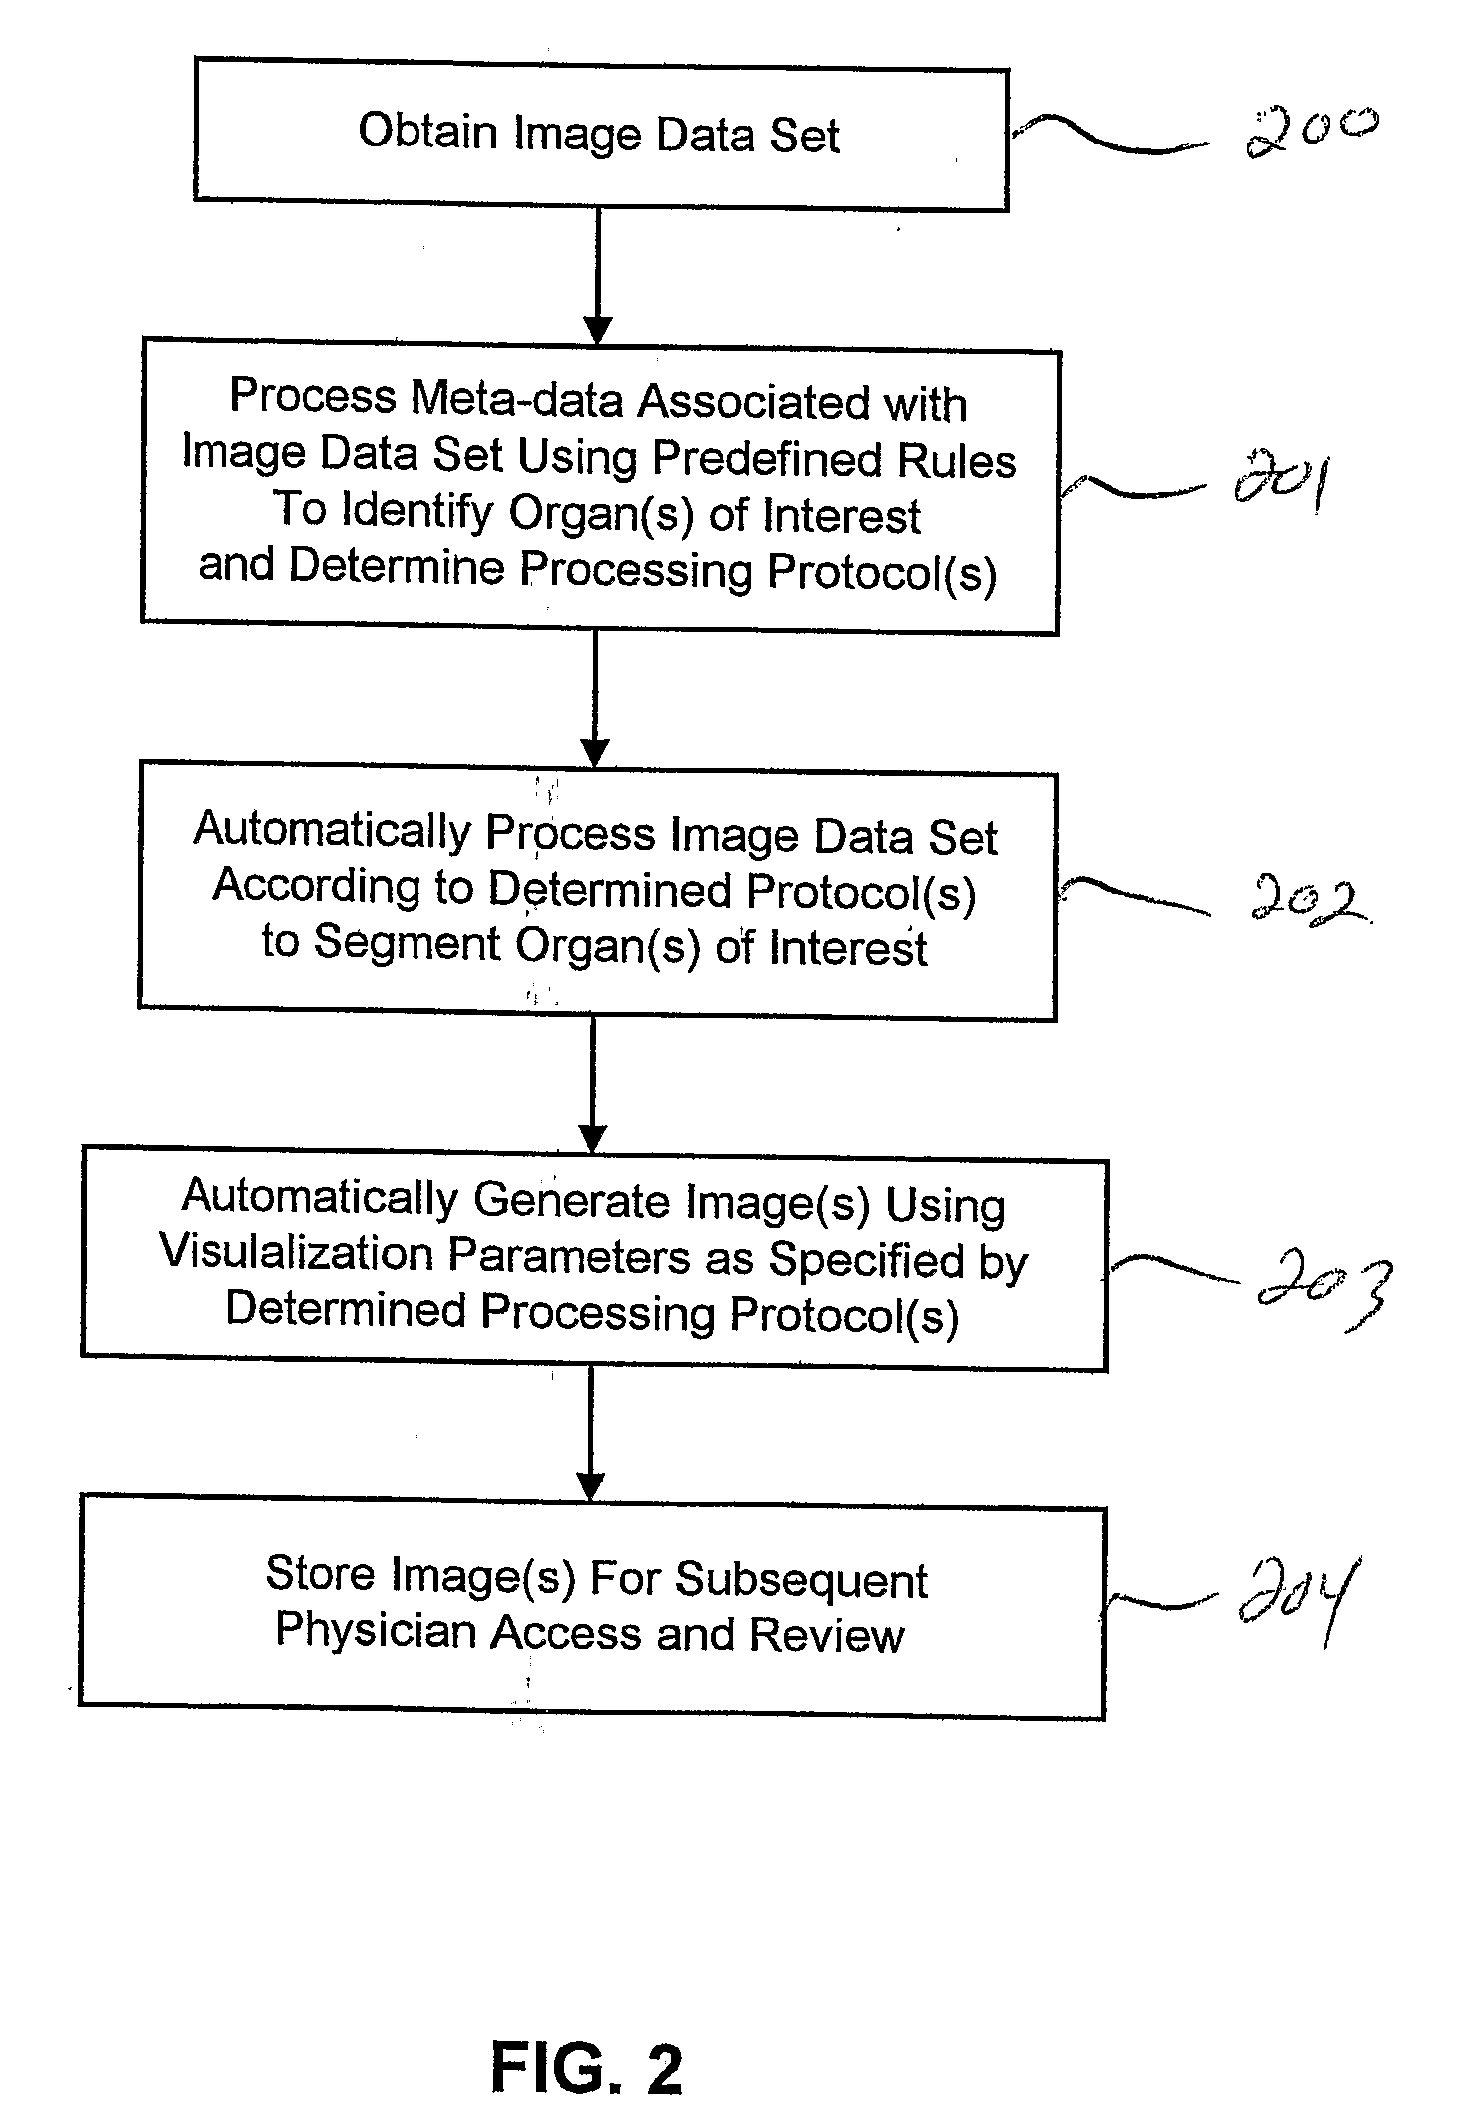 Systems and Methods for Automated Segmentation, Visualization and Analysis of Medical Images